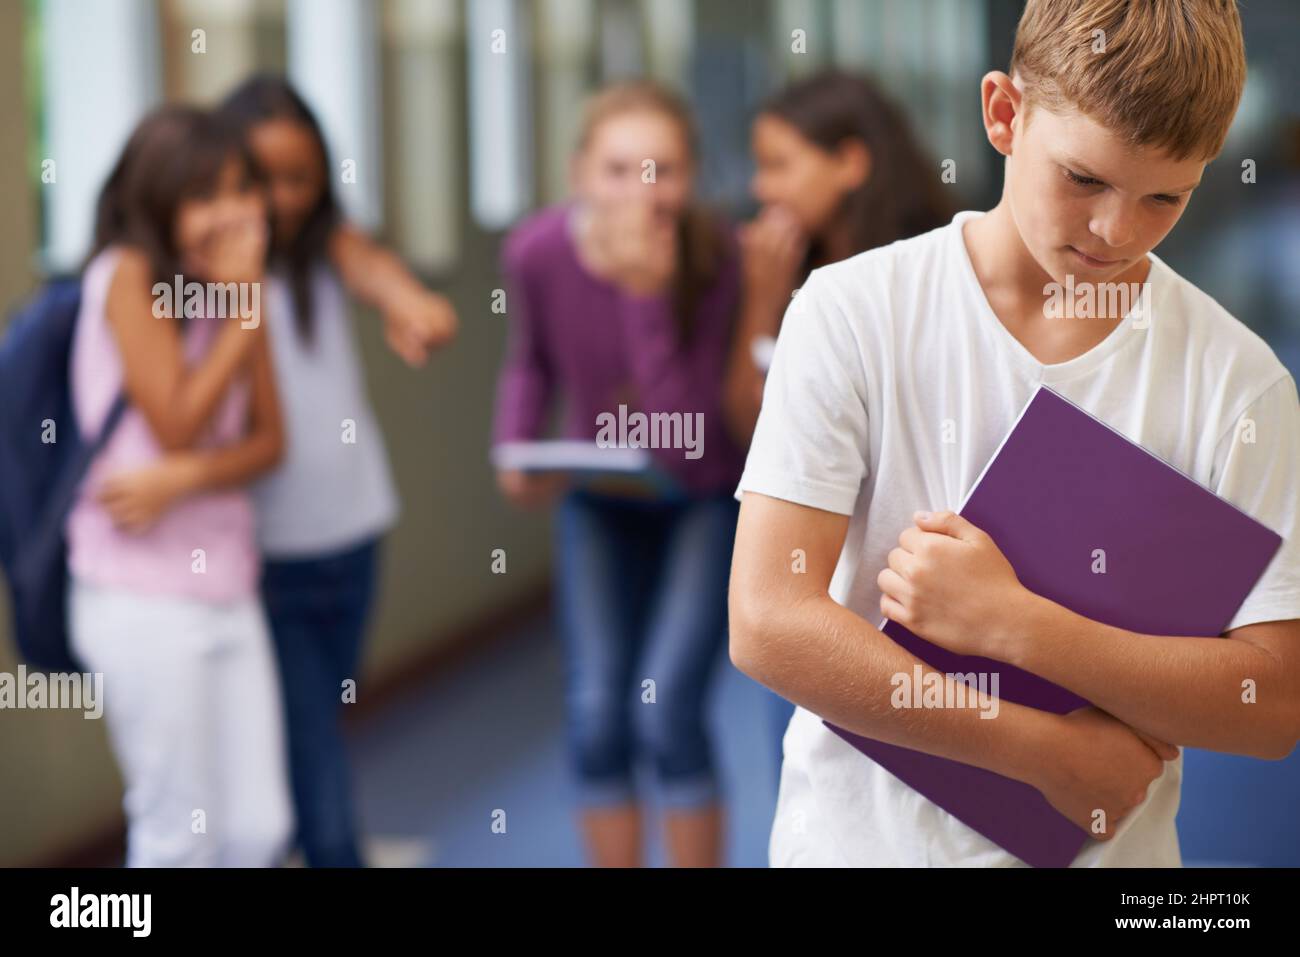 Being made to feel like an outcast. A young boy being bullied at school. Stock Photo